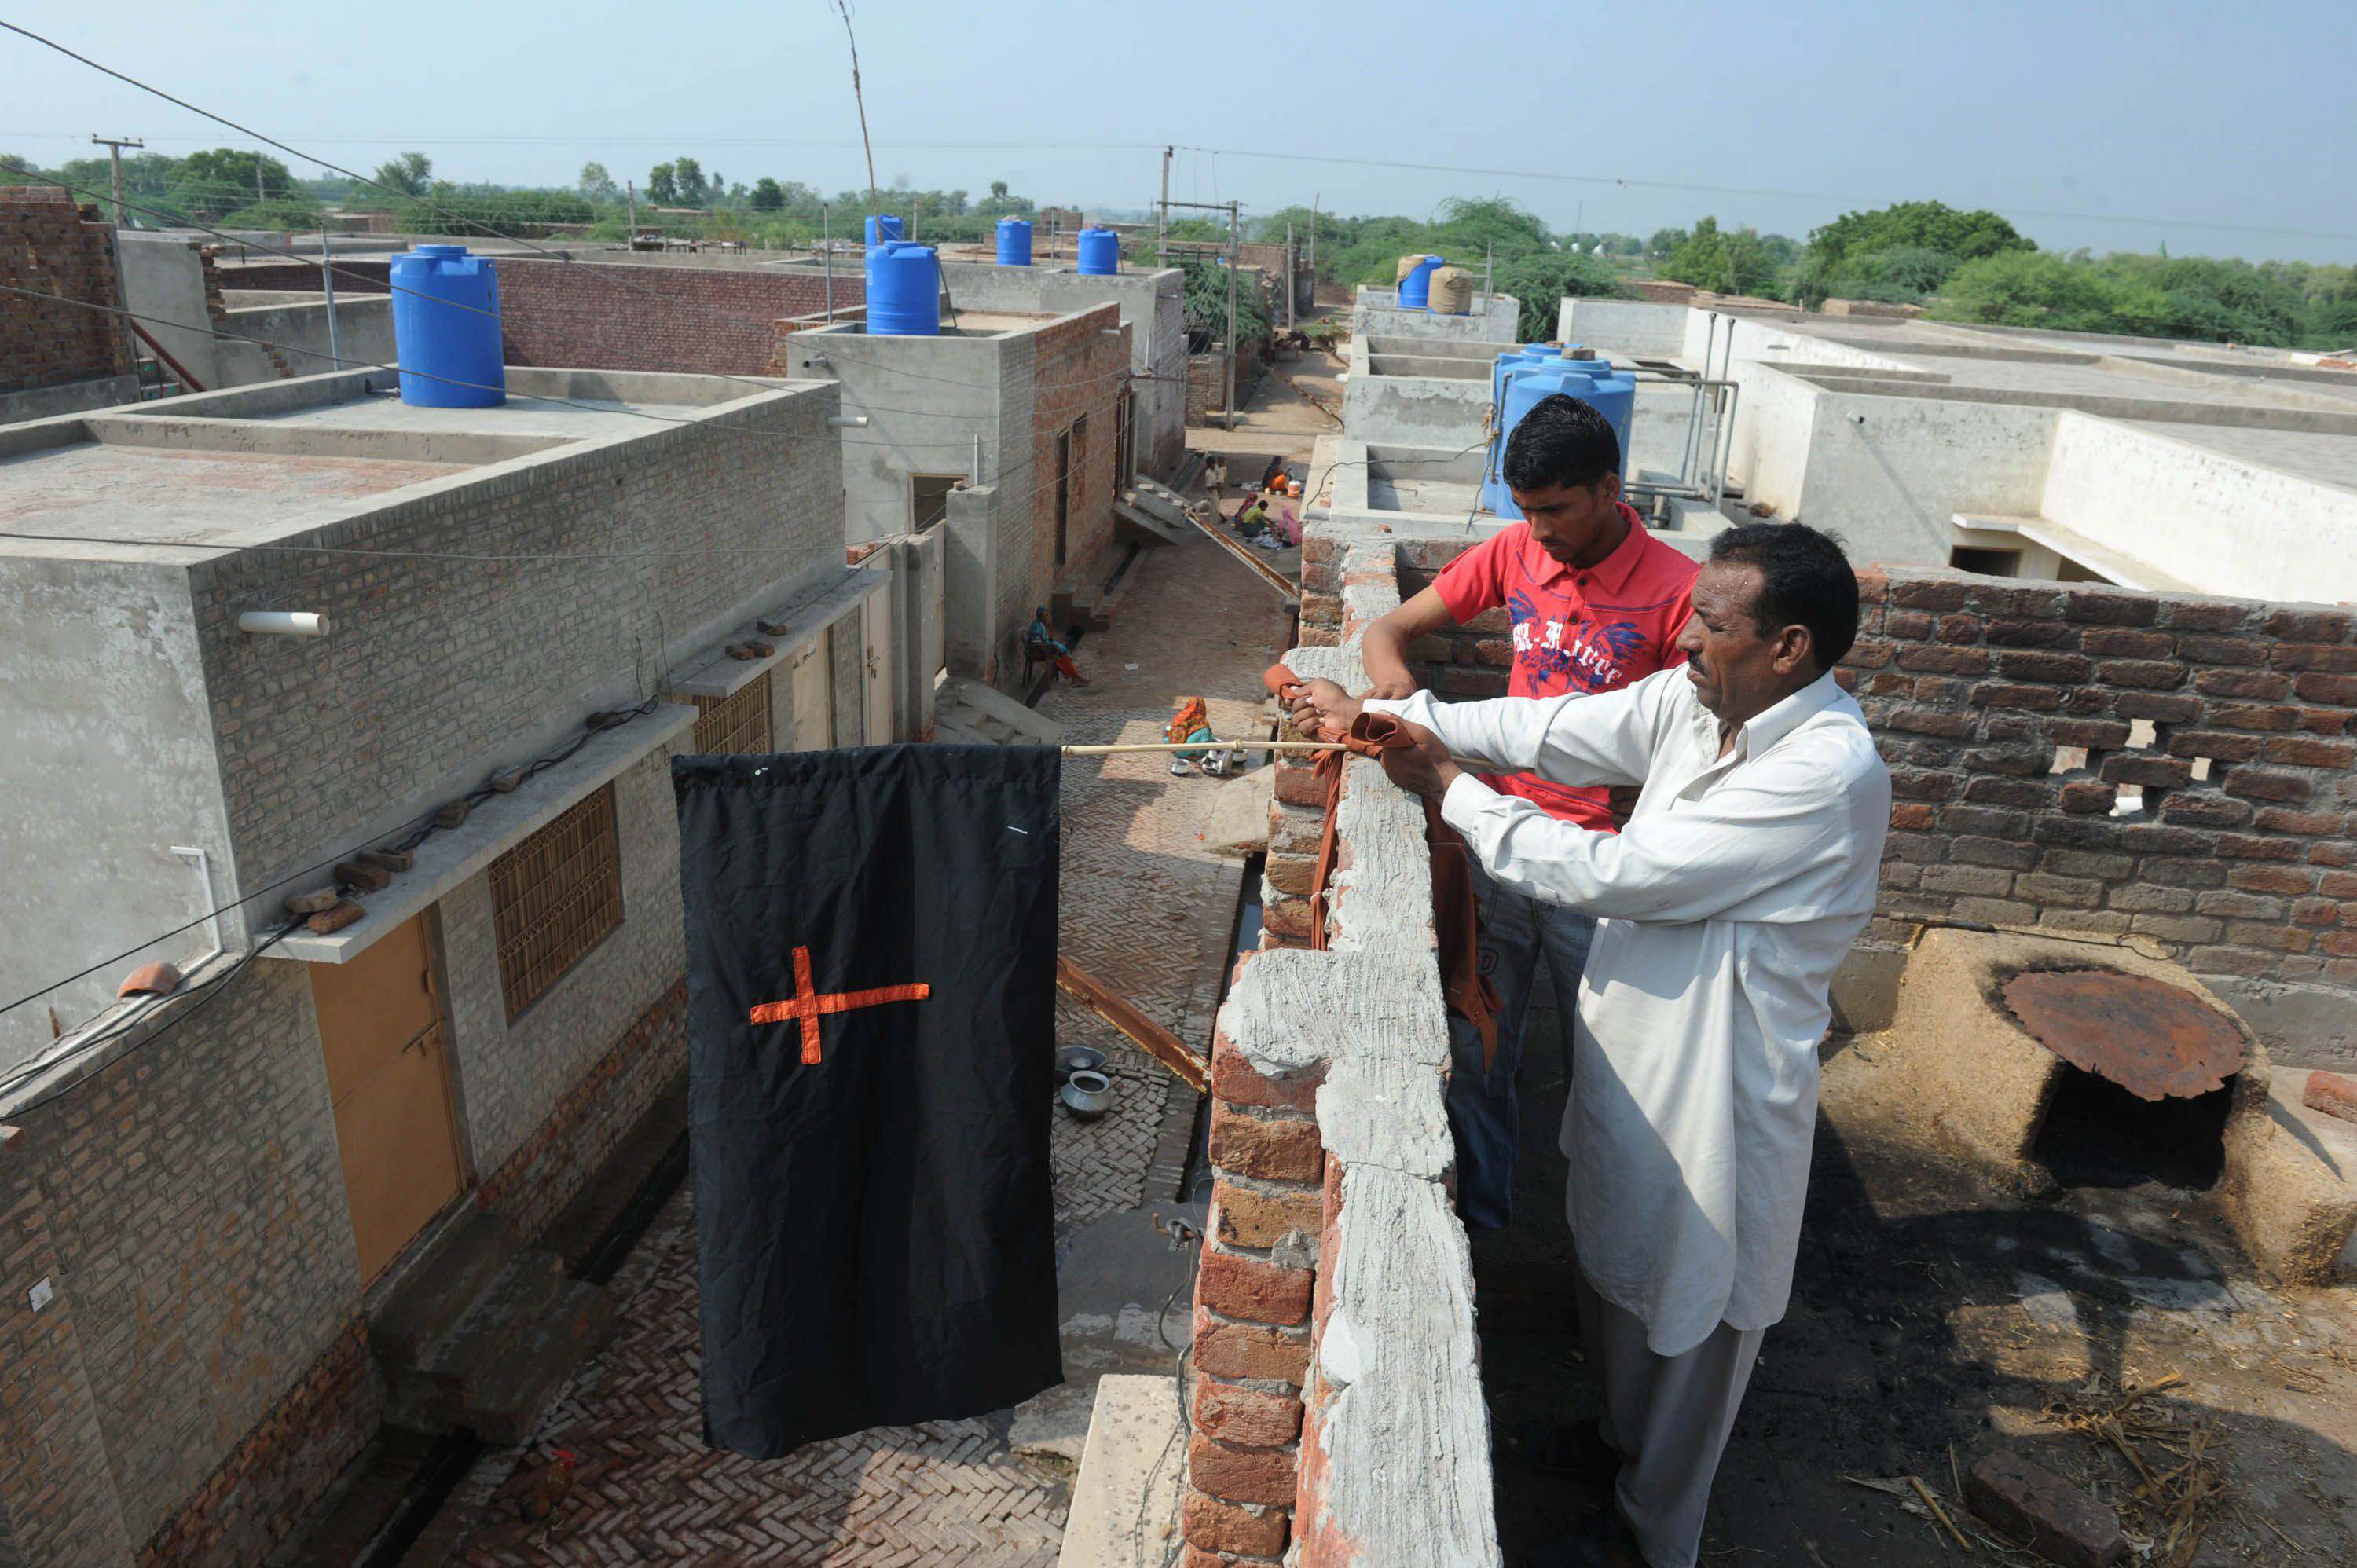 a pakistani christian resident hangs a flag with the cross symbol at his home in korian on august 30 2012 photo afp file